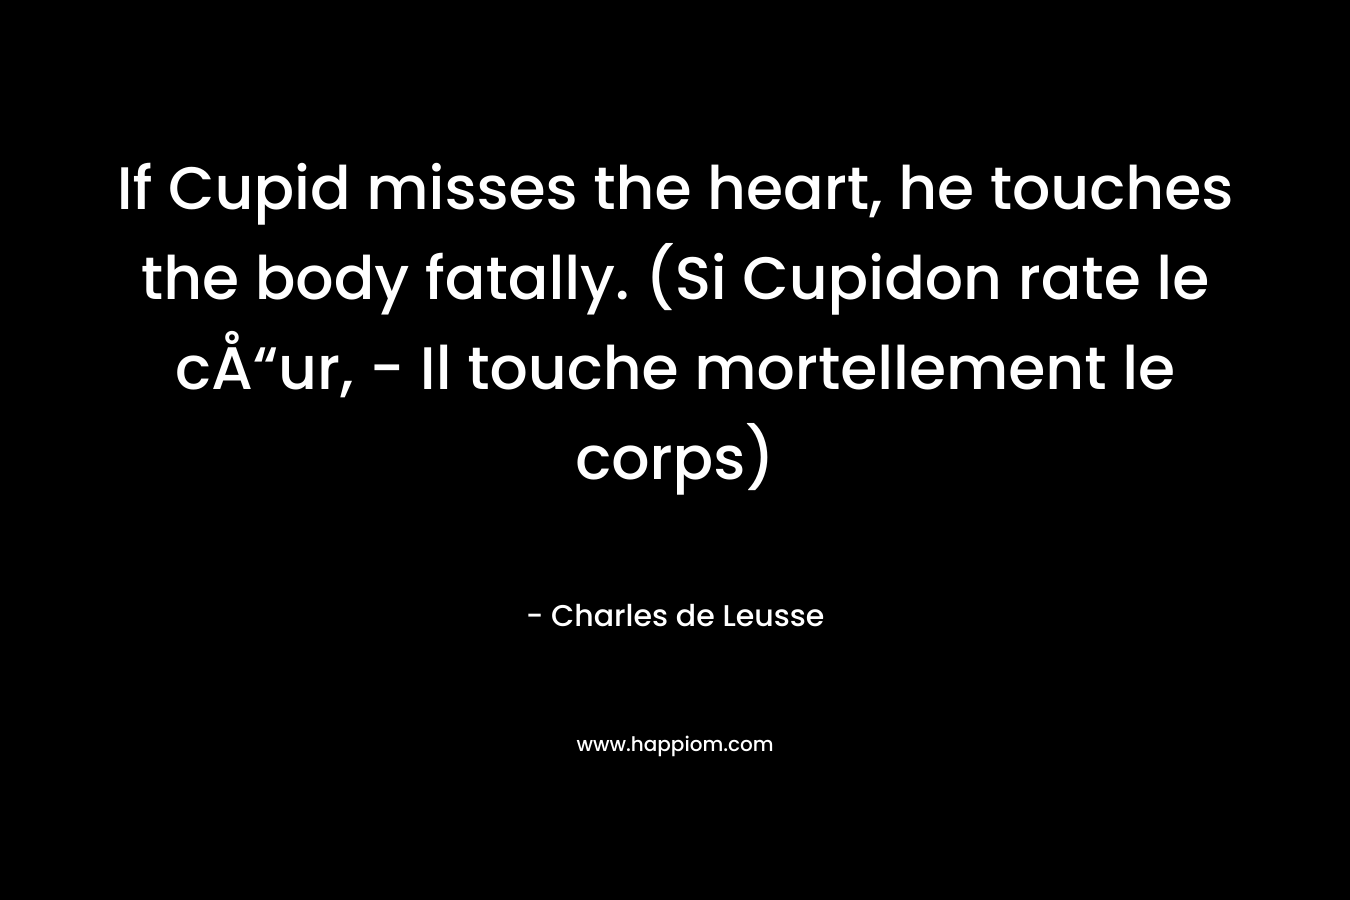 If Cupid misses the heart, he touches the body fatally. (Si Cupidon rate le cÅ“ur, - Il touche mortellement le corps)